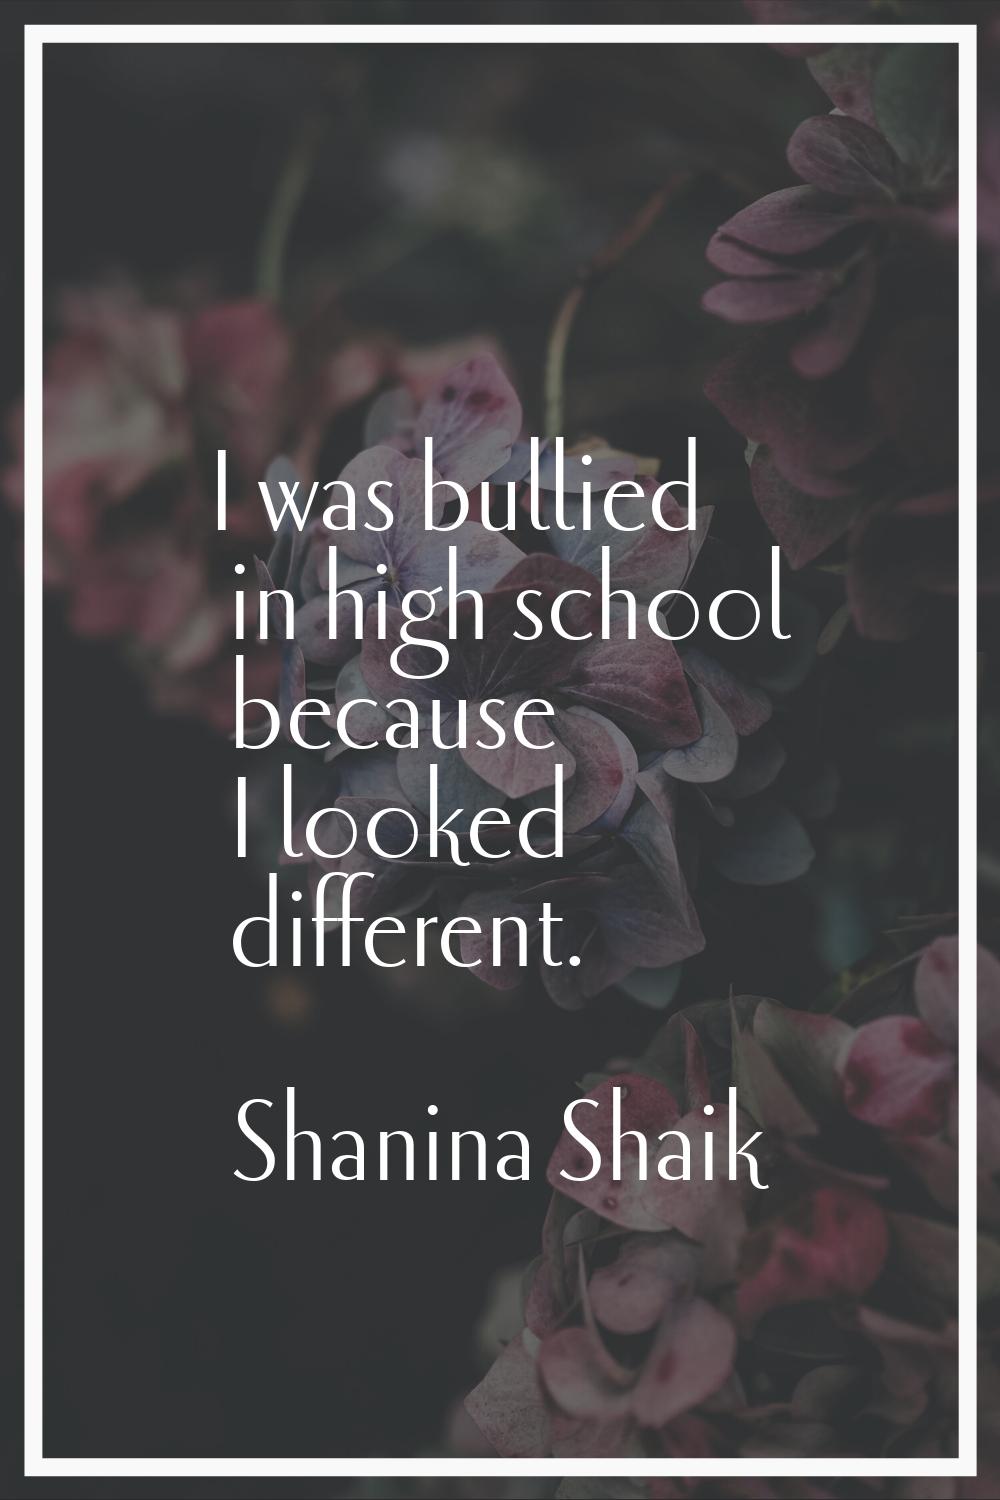 I was bullied in high school because I looked different.